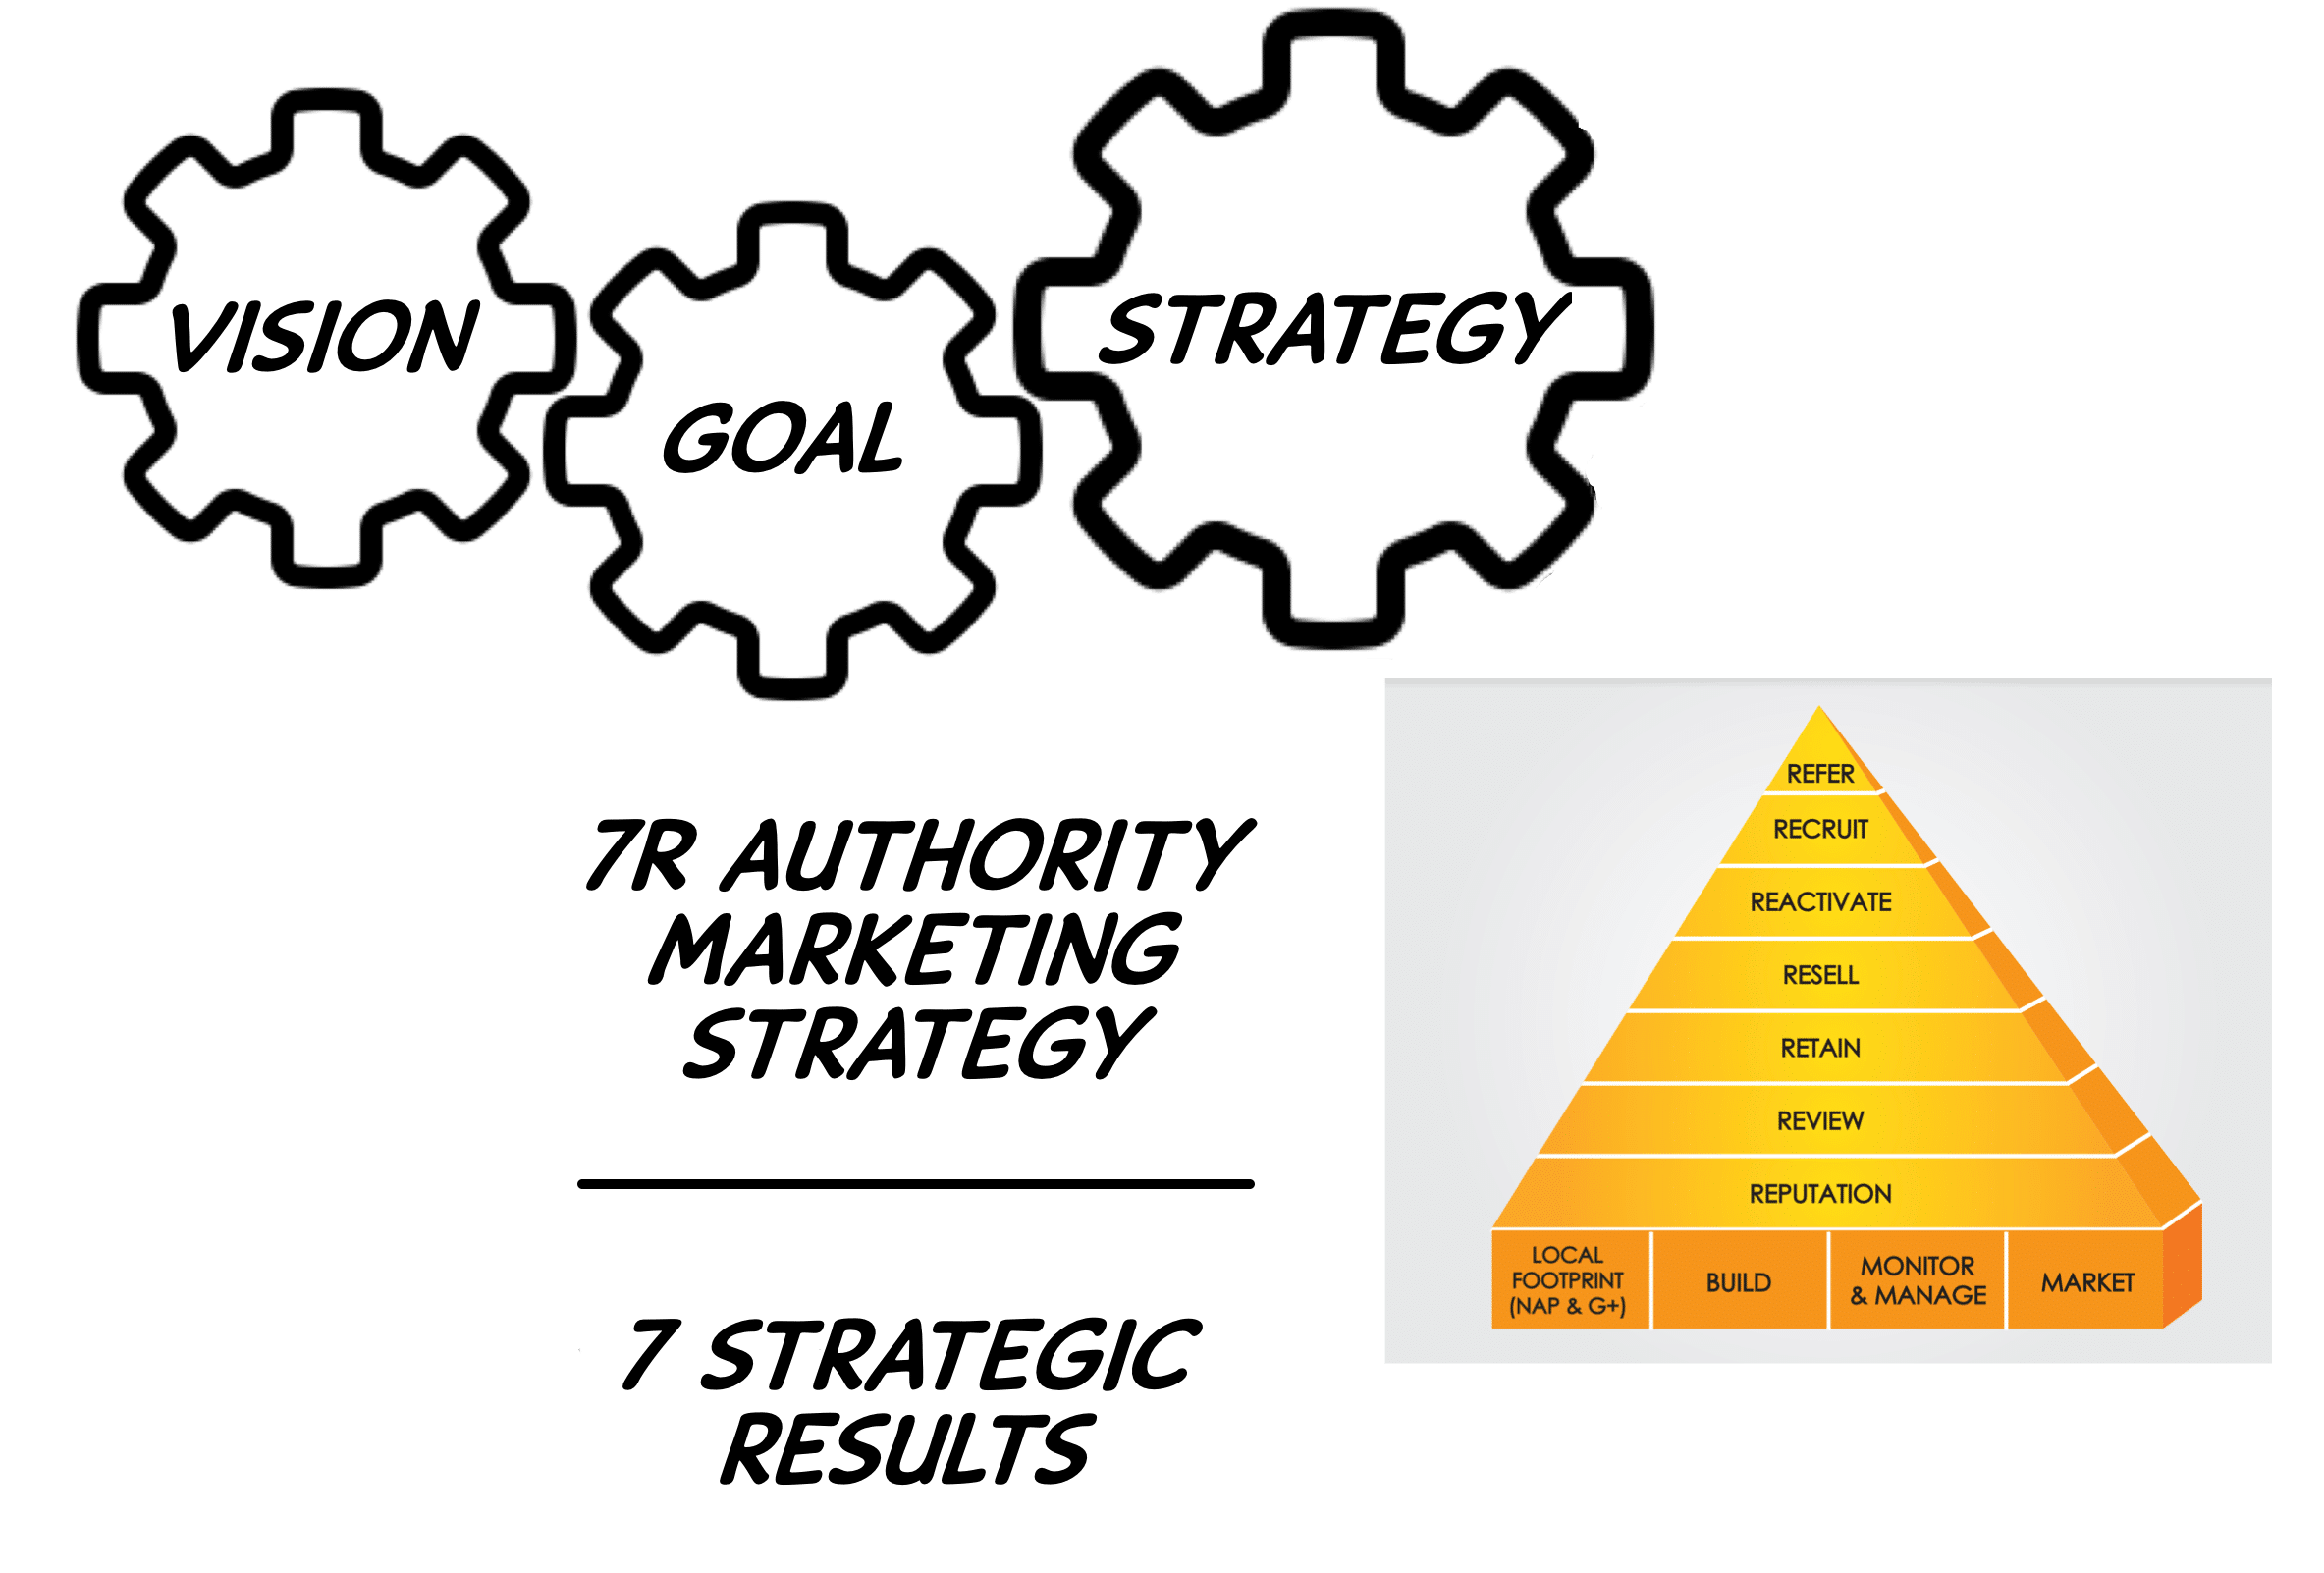 Strategy: The 7R Authority Marketing Strategy